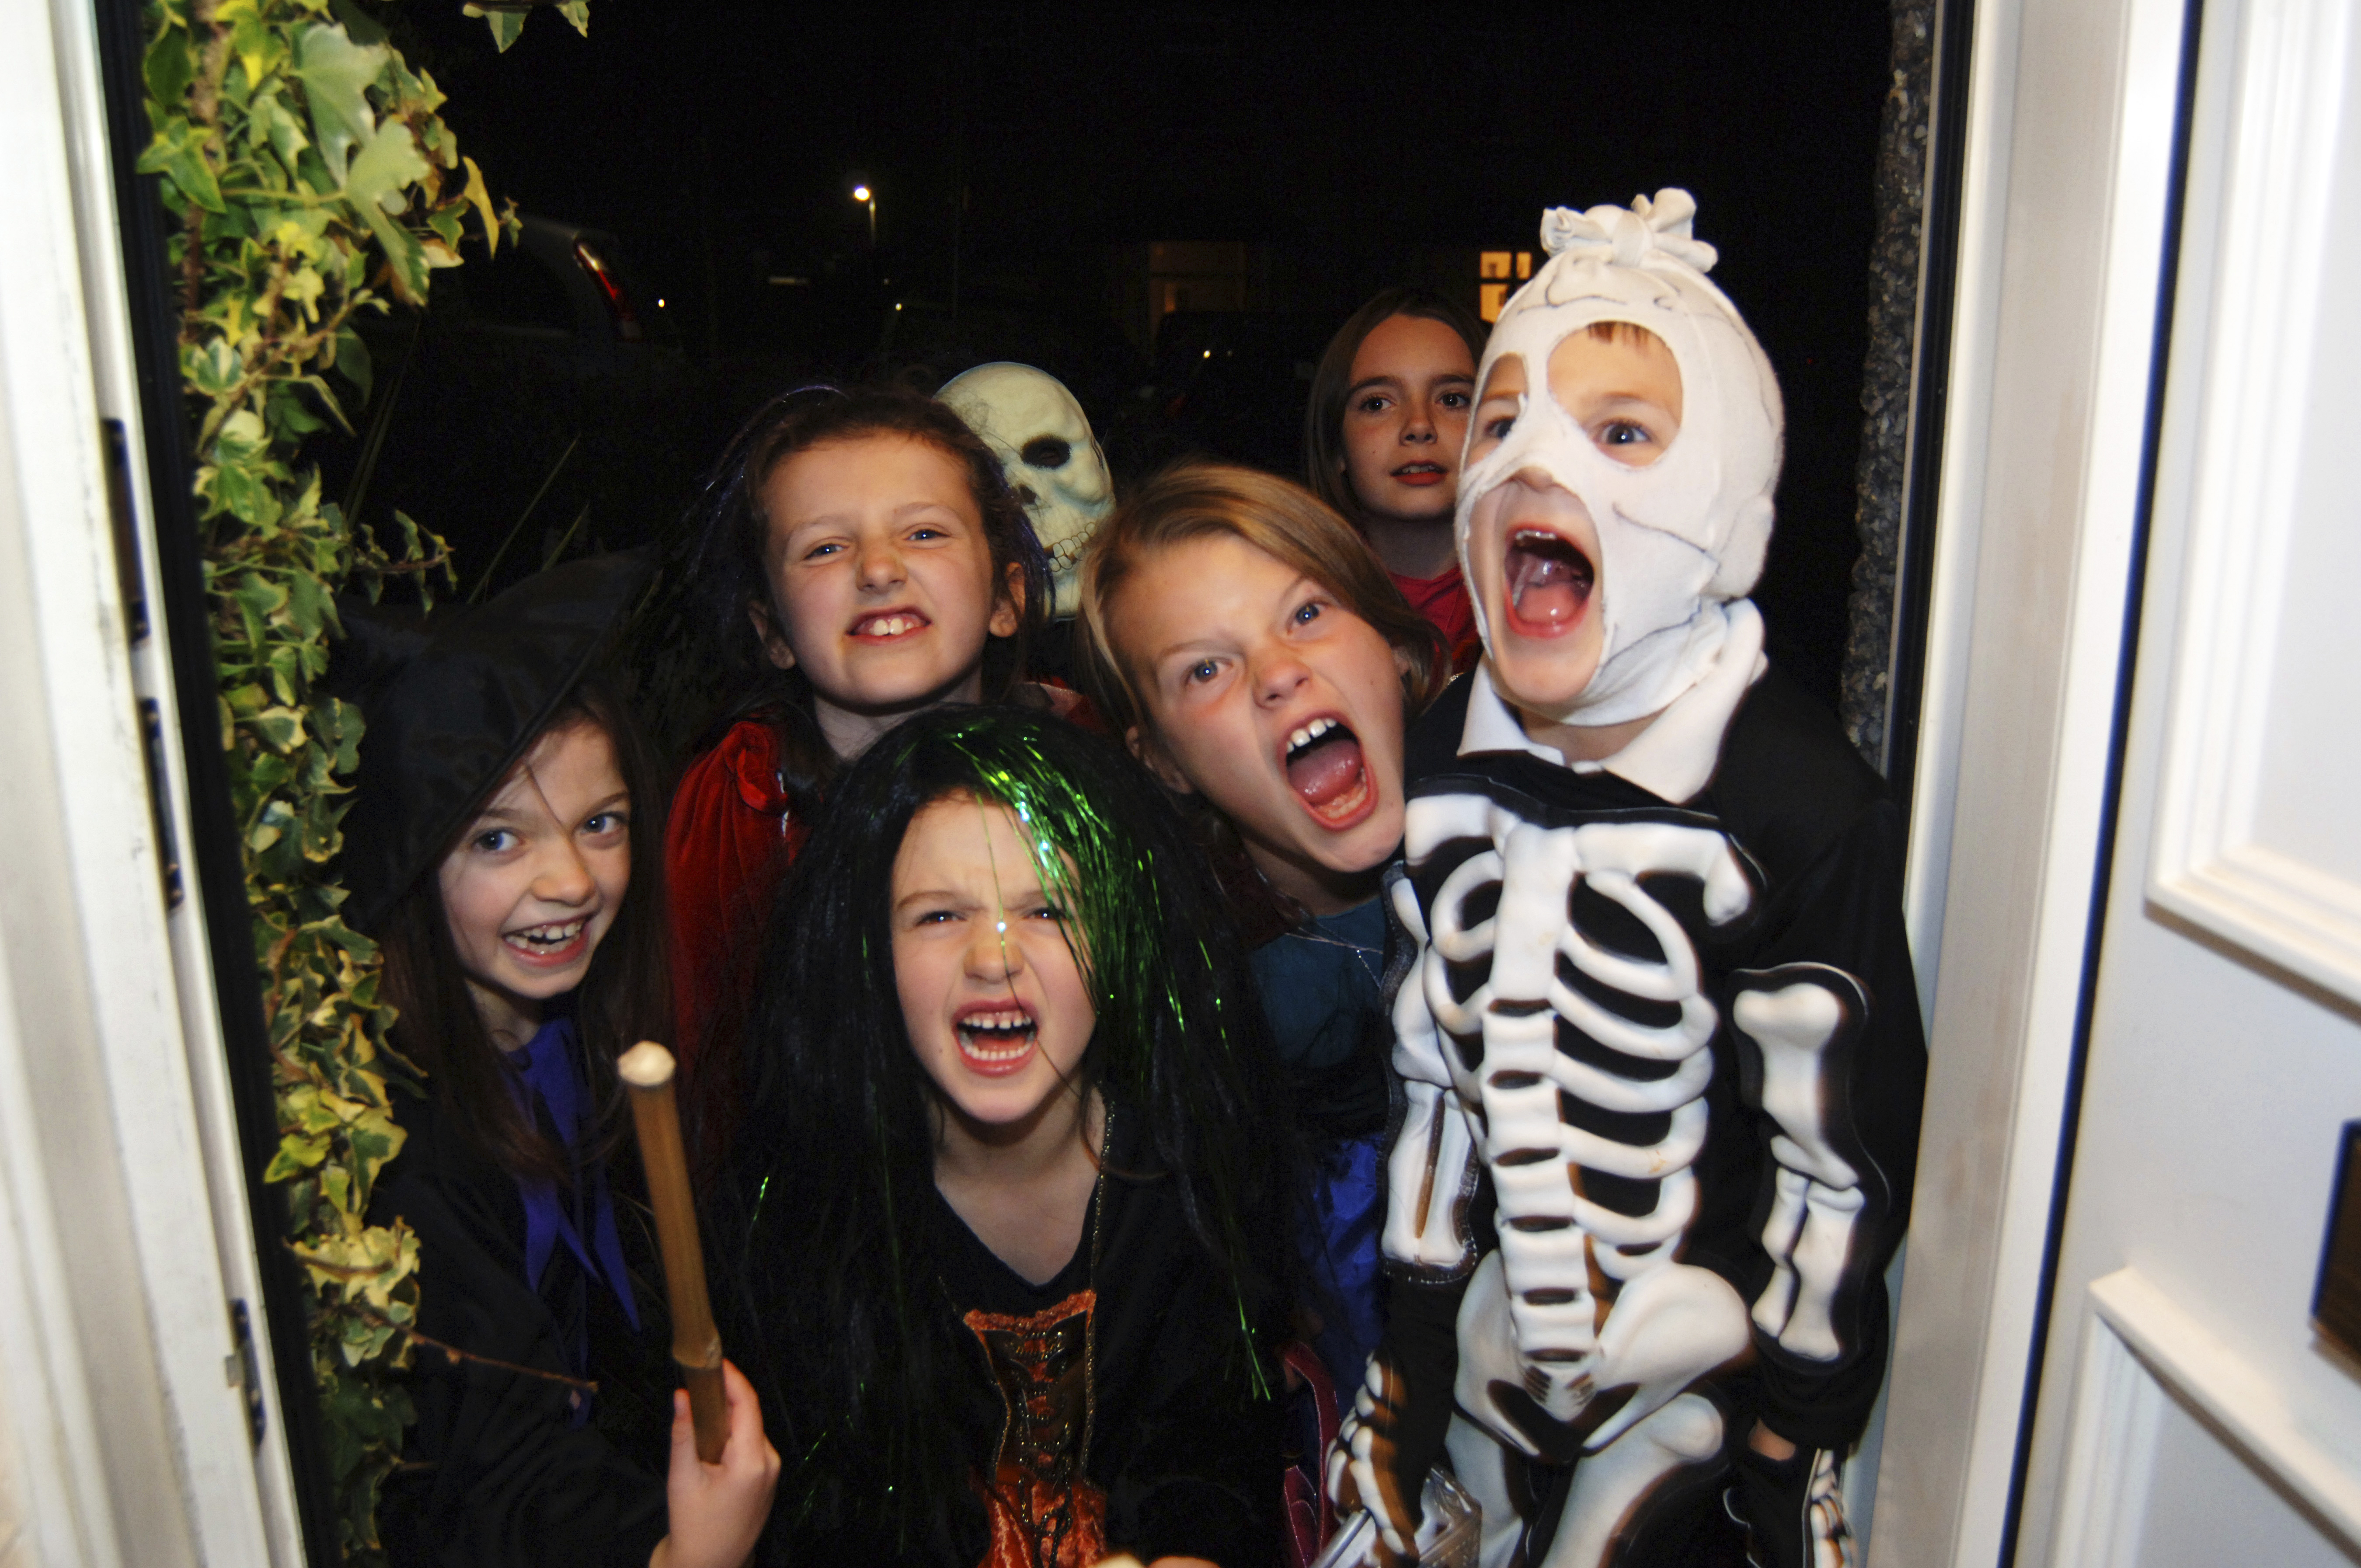 Children trick or treating at Halloween